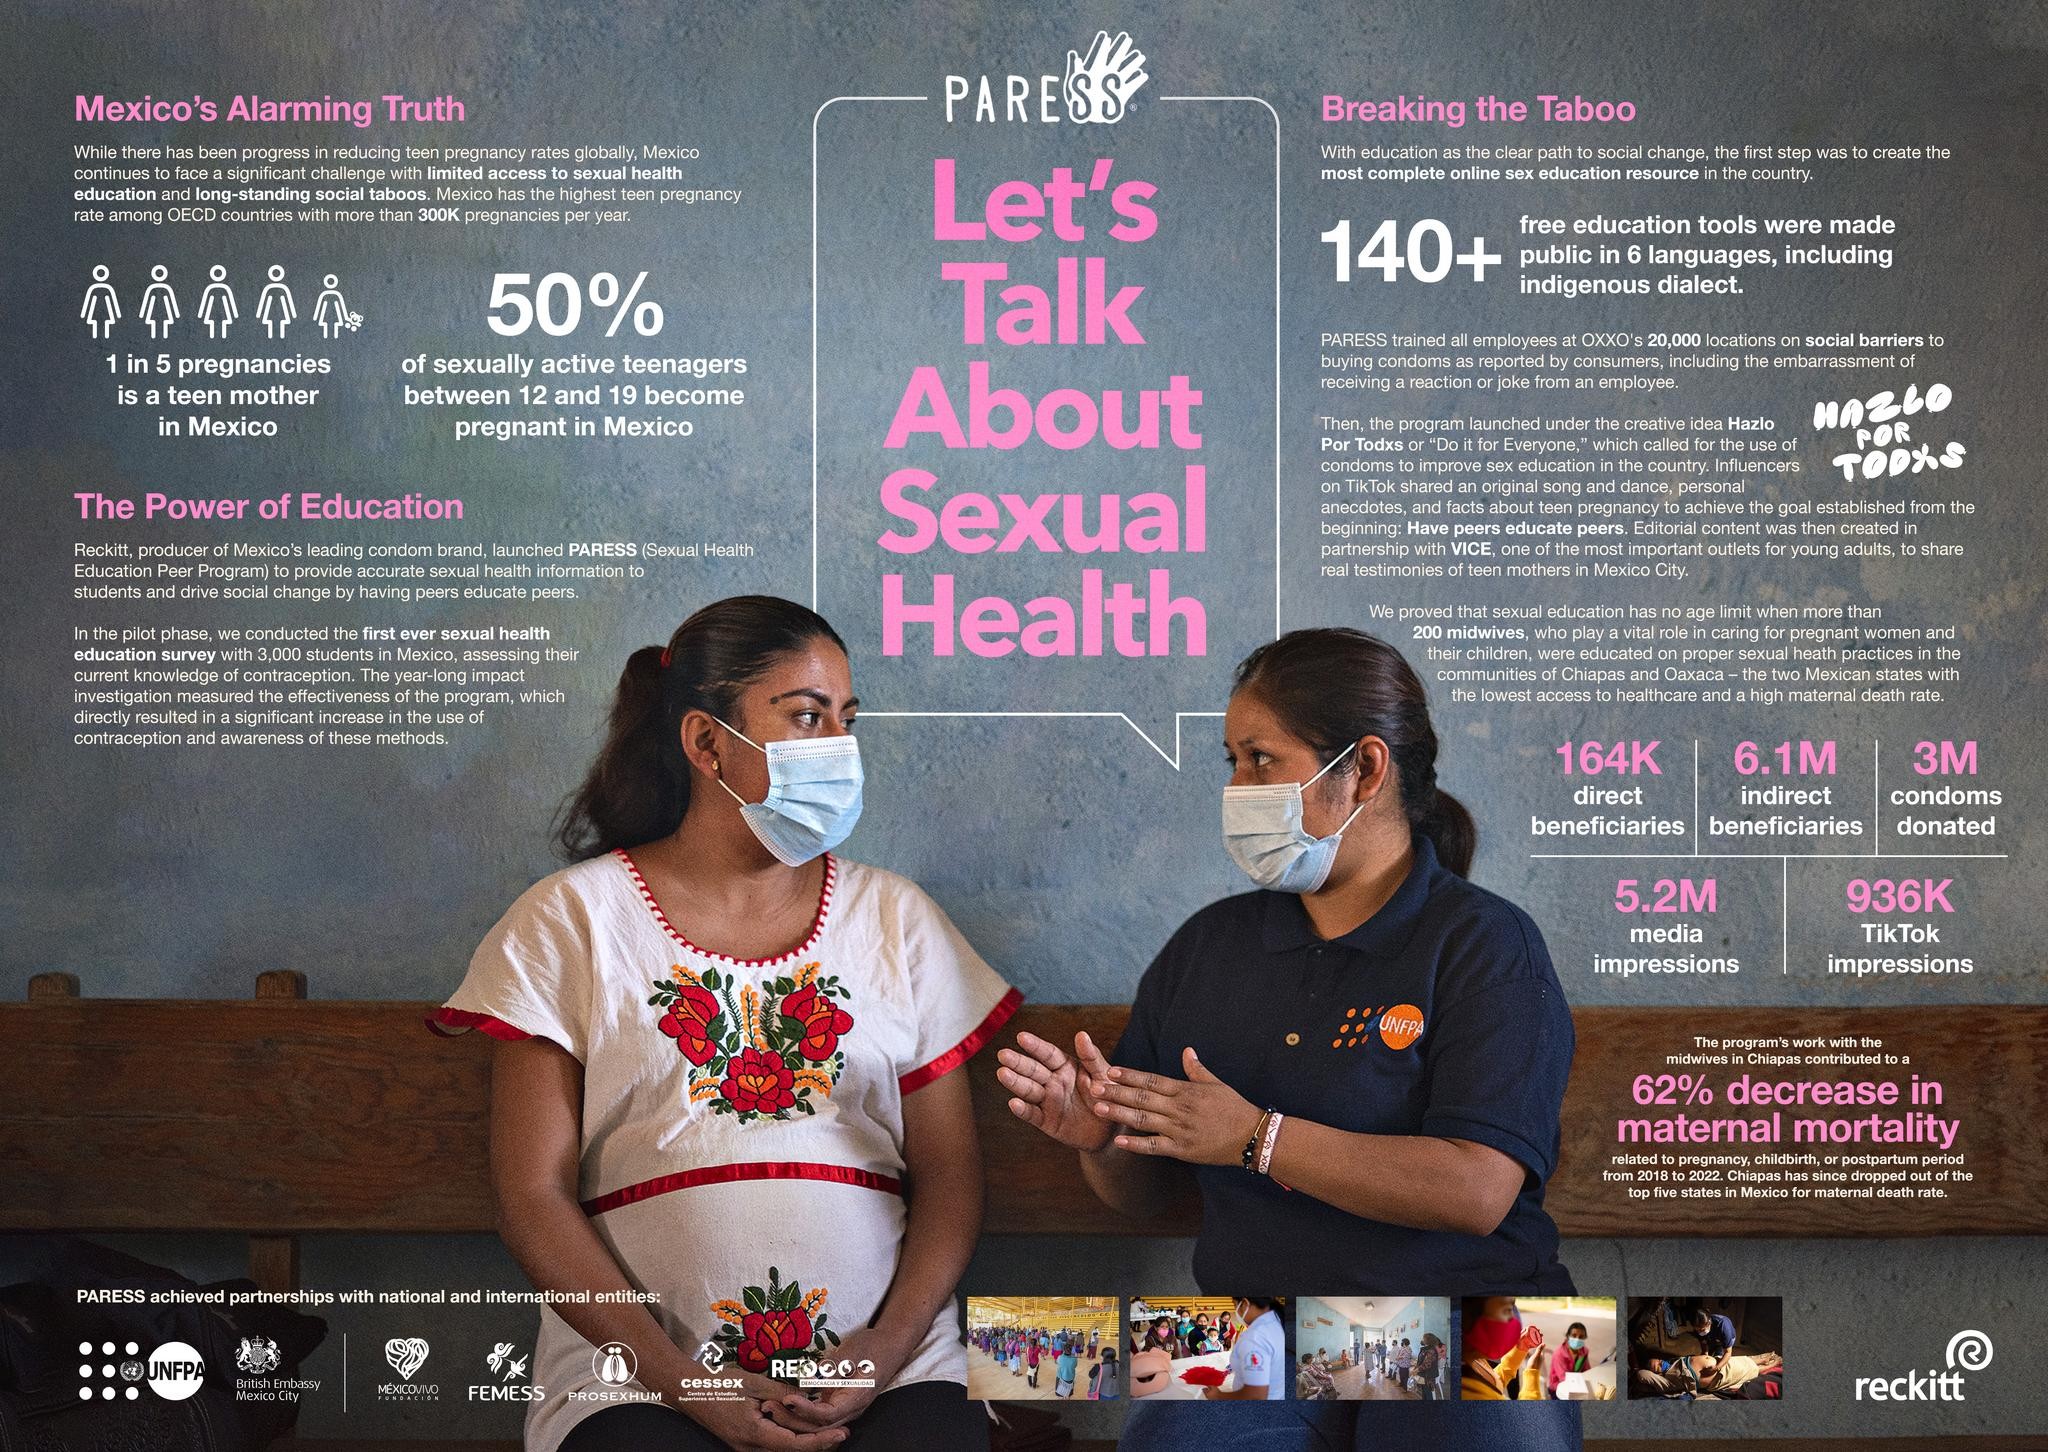 Let's Talk About Sexual Health